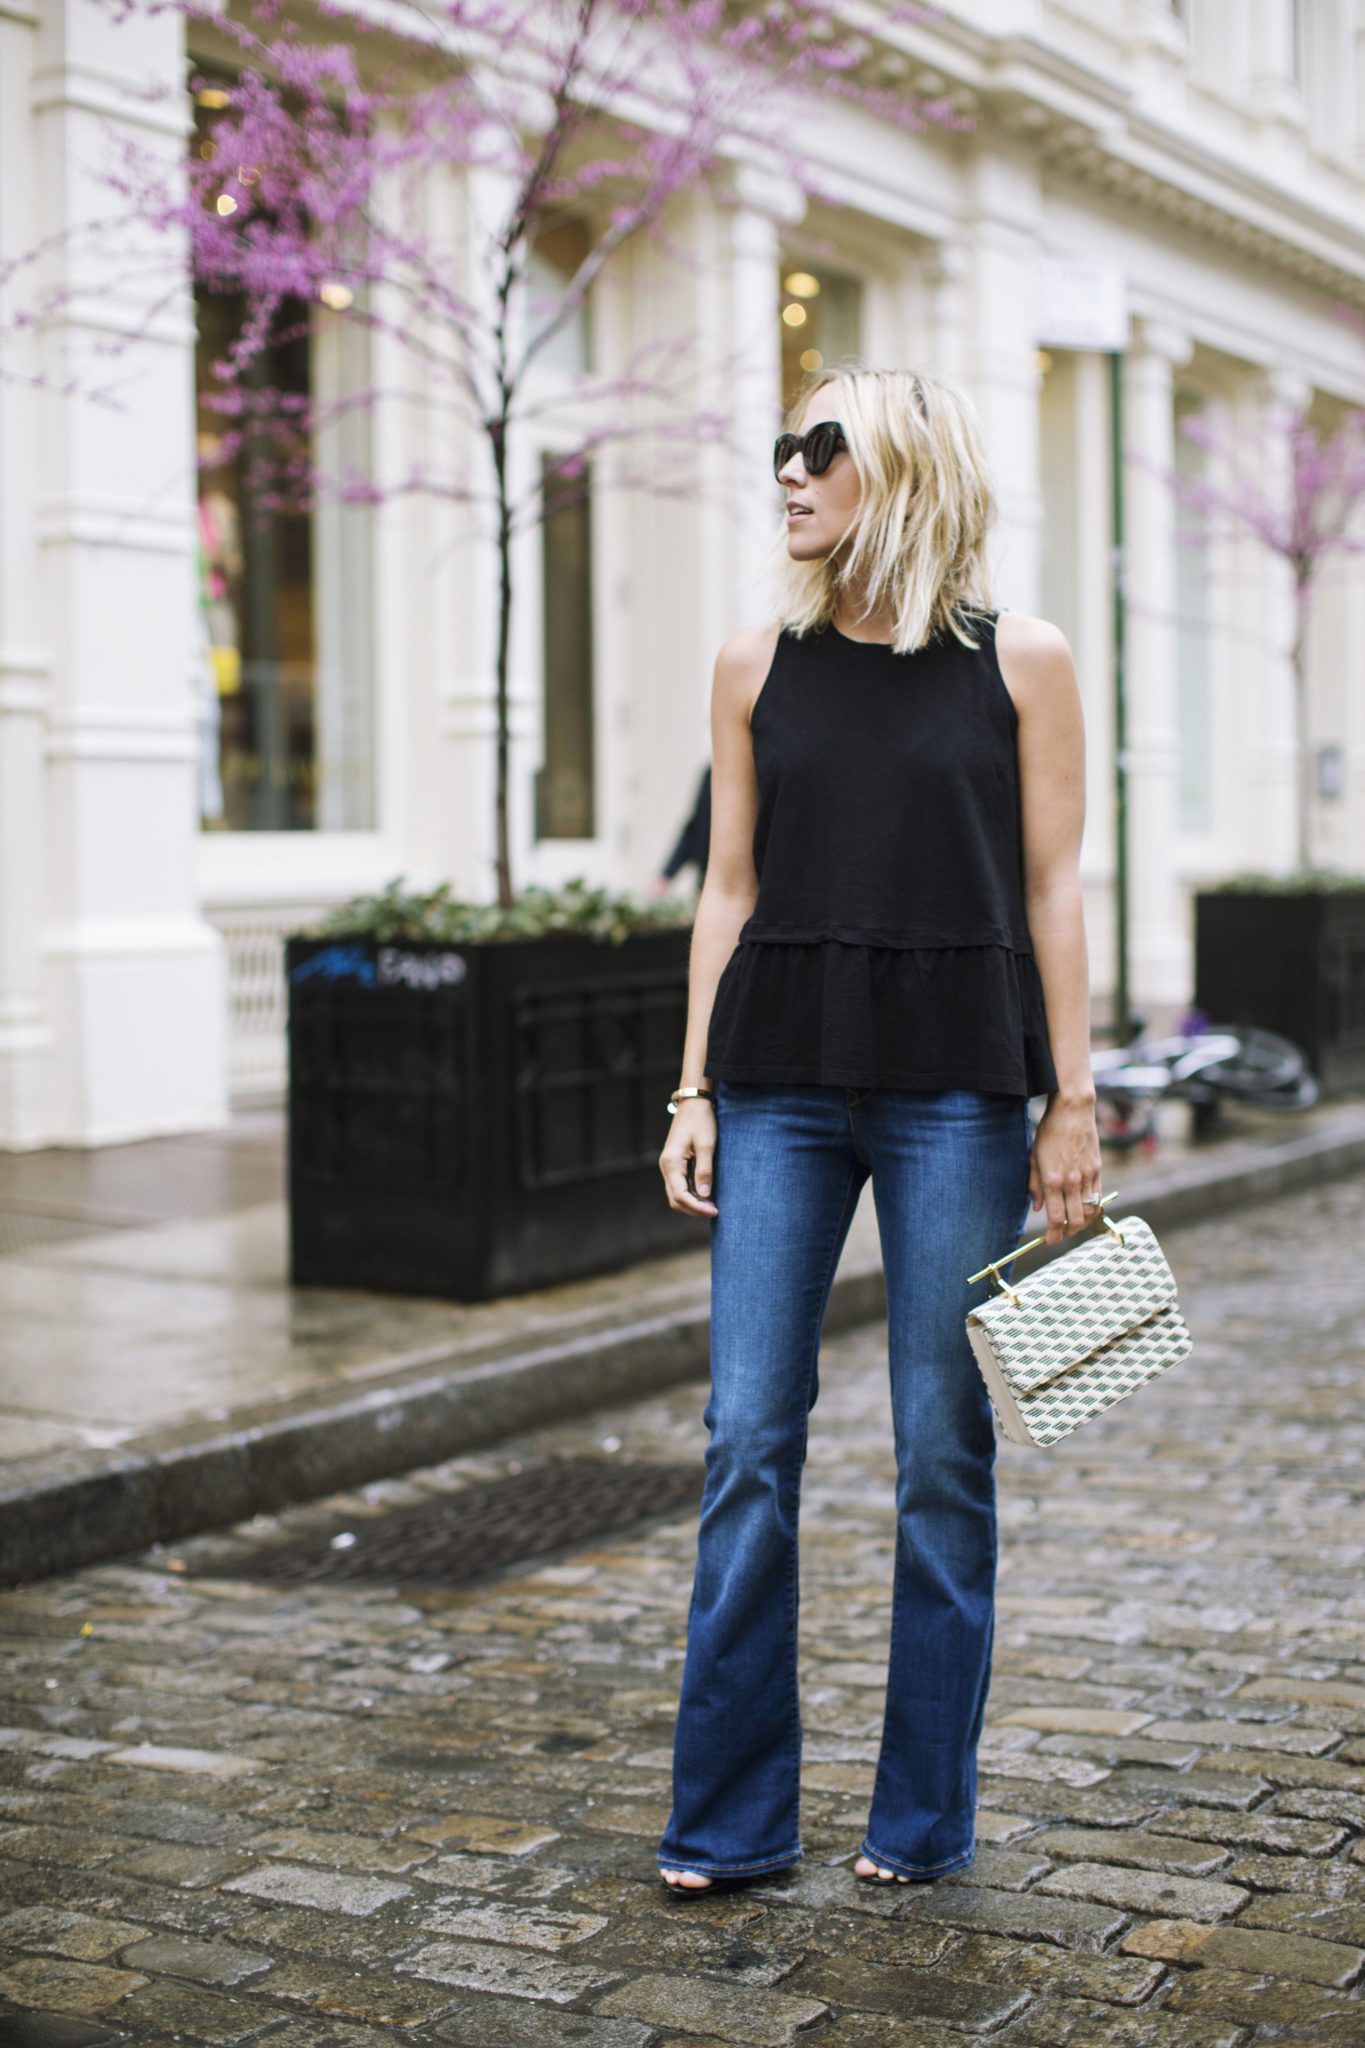 The Flared Jeans Trend and 17 Ways to Wear Them - Lillies and Lashes